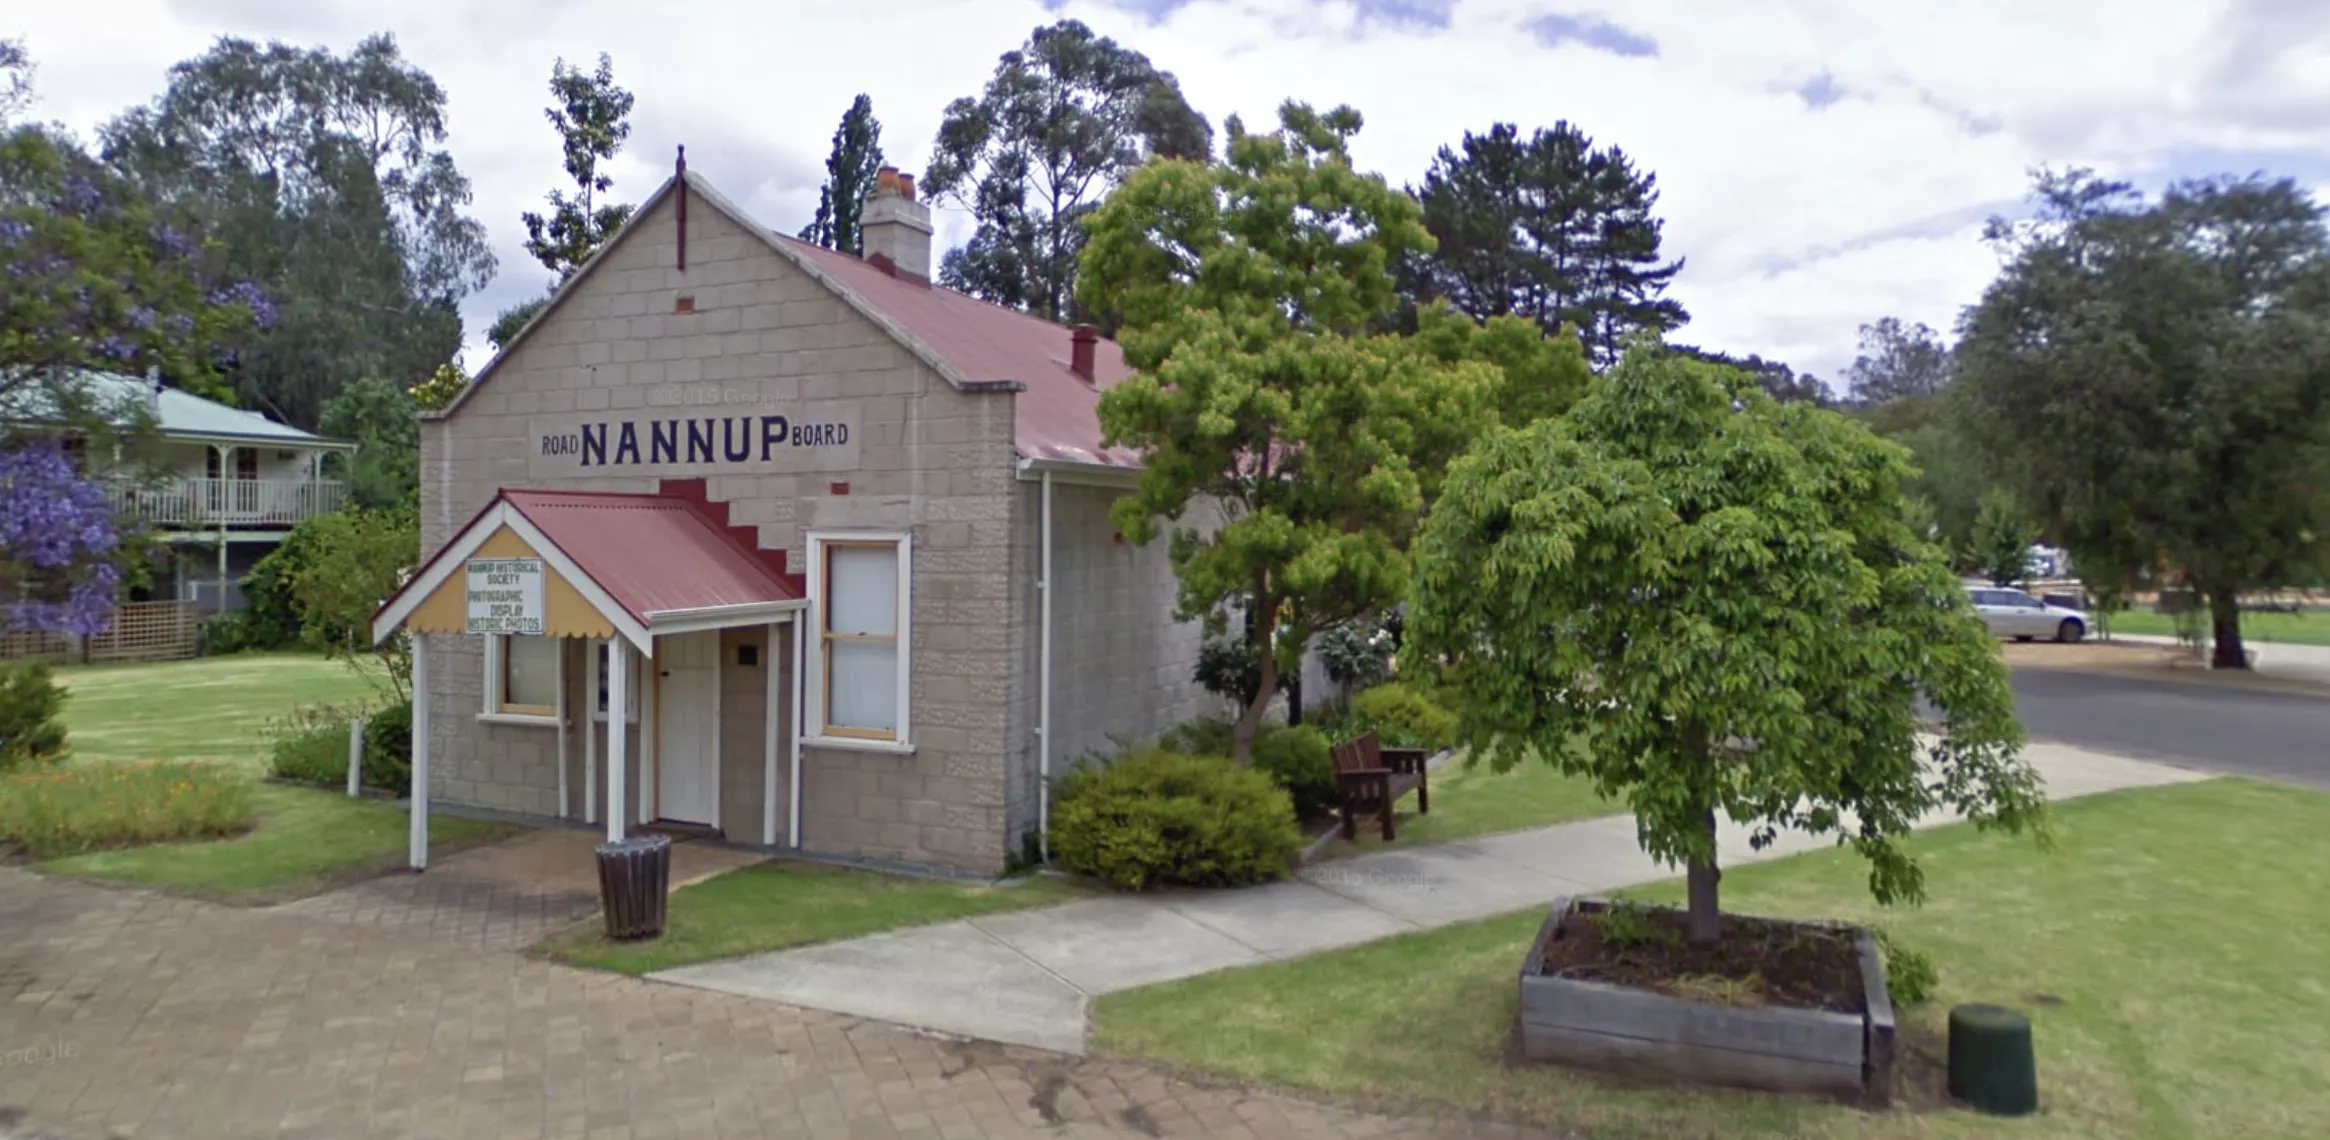 Nannup Historical Society building